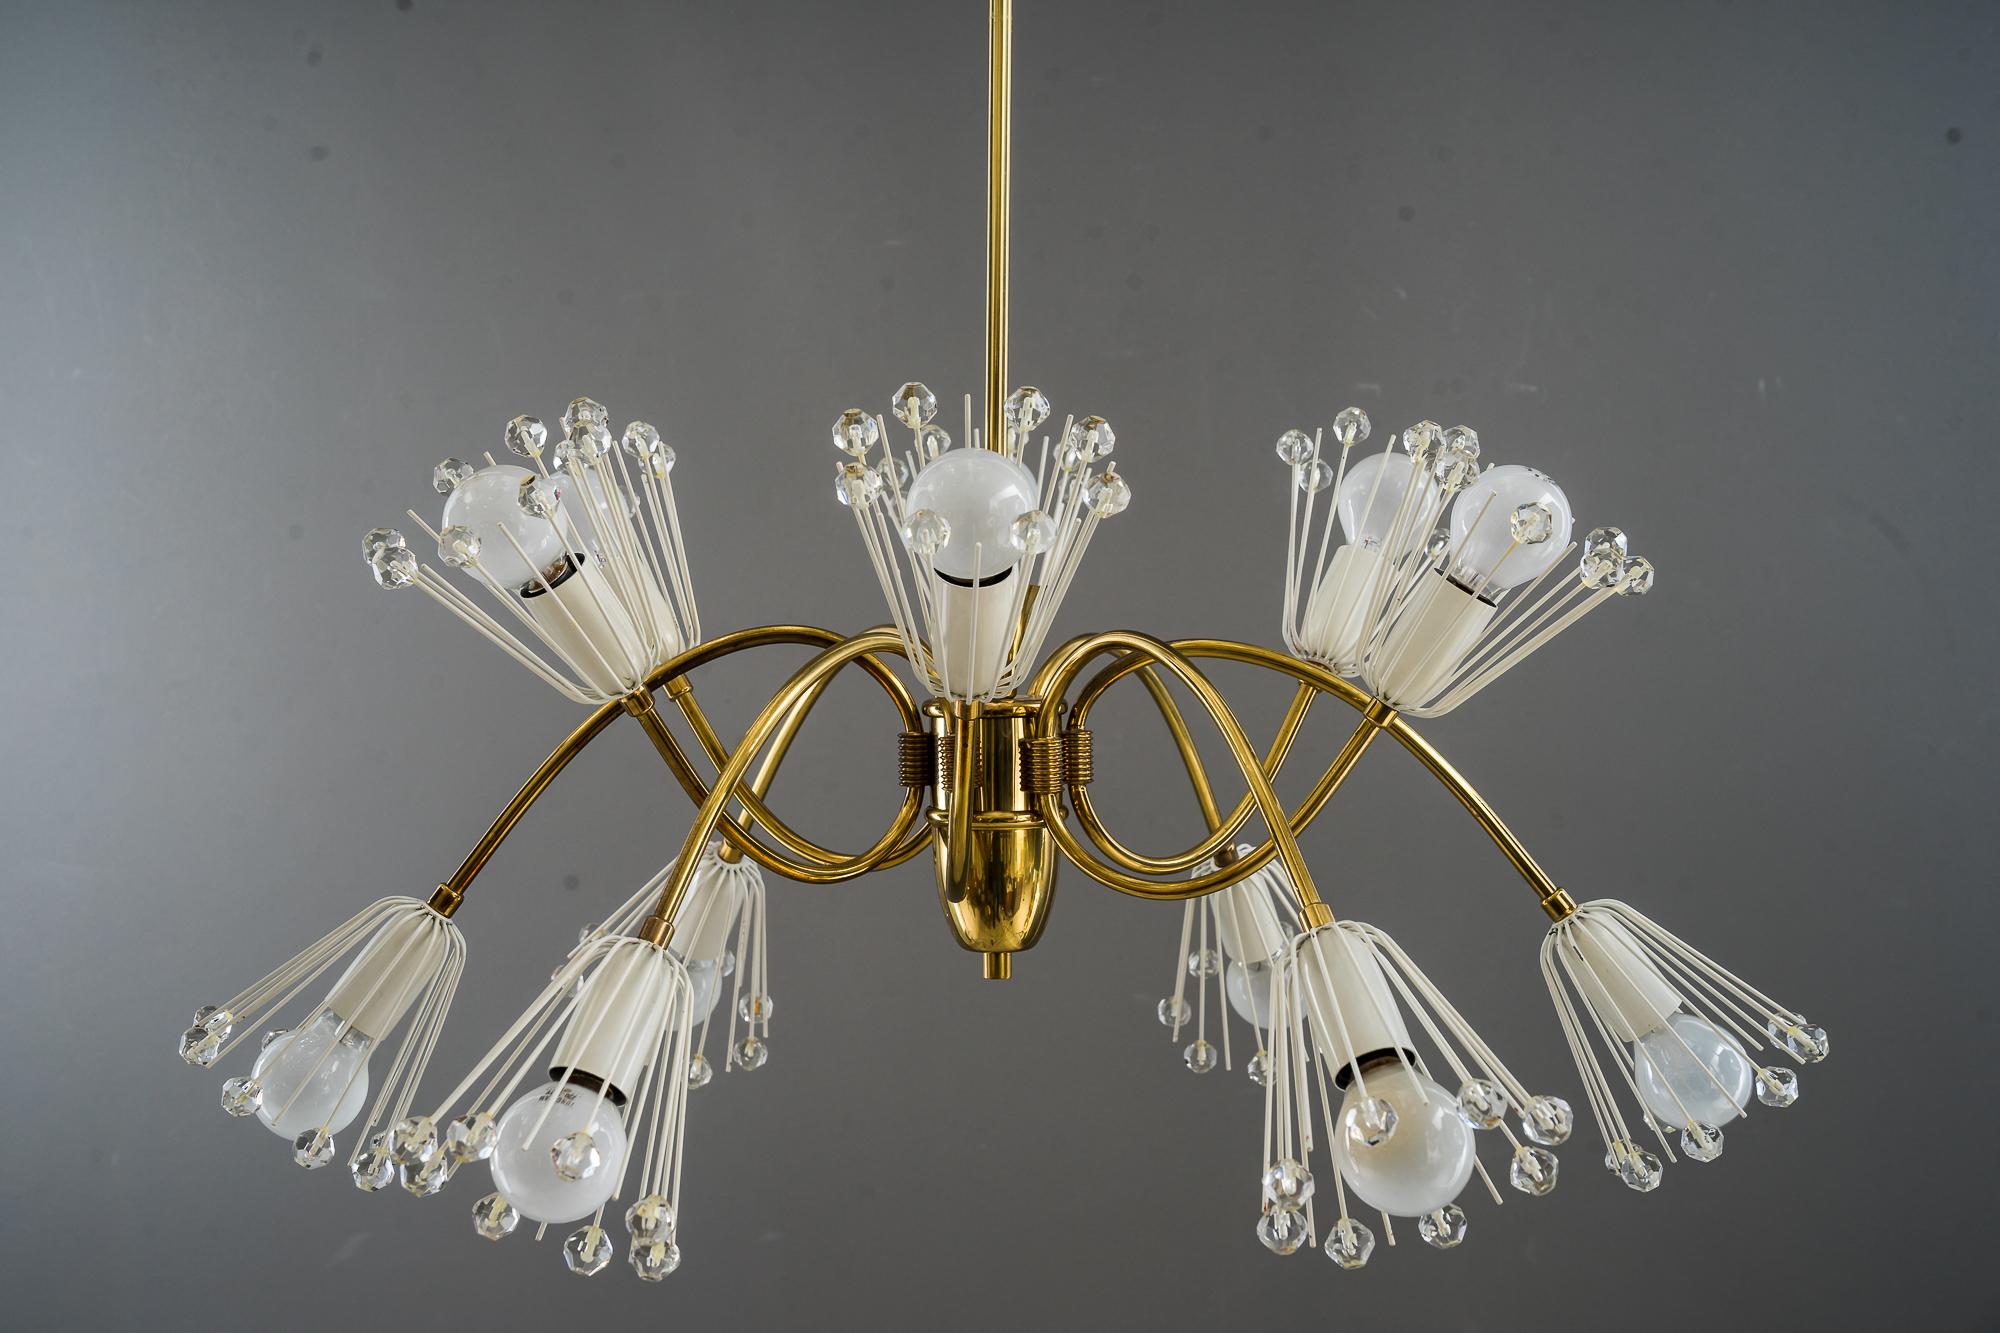 Beautiful chandelier by Emil Stejnar for Rupert Nikoll
Original condition
( 12 arms ).